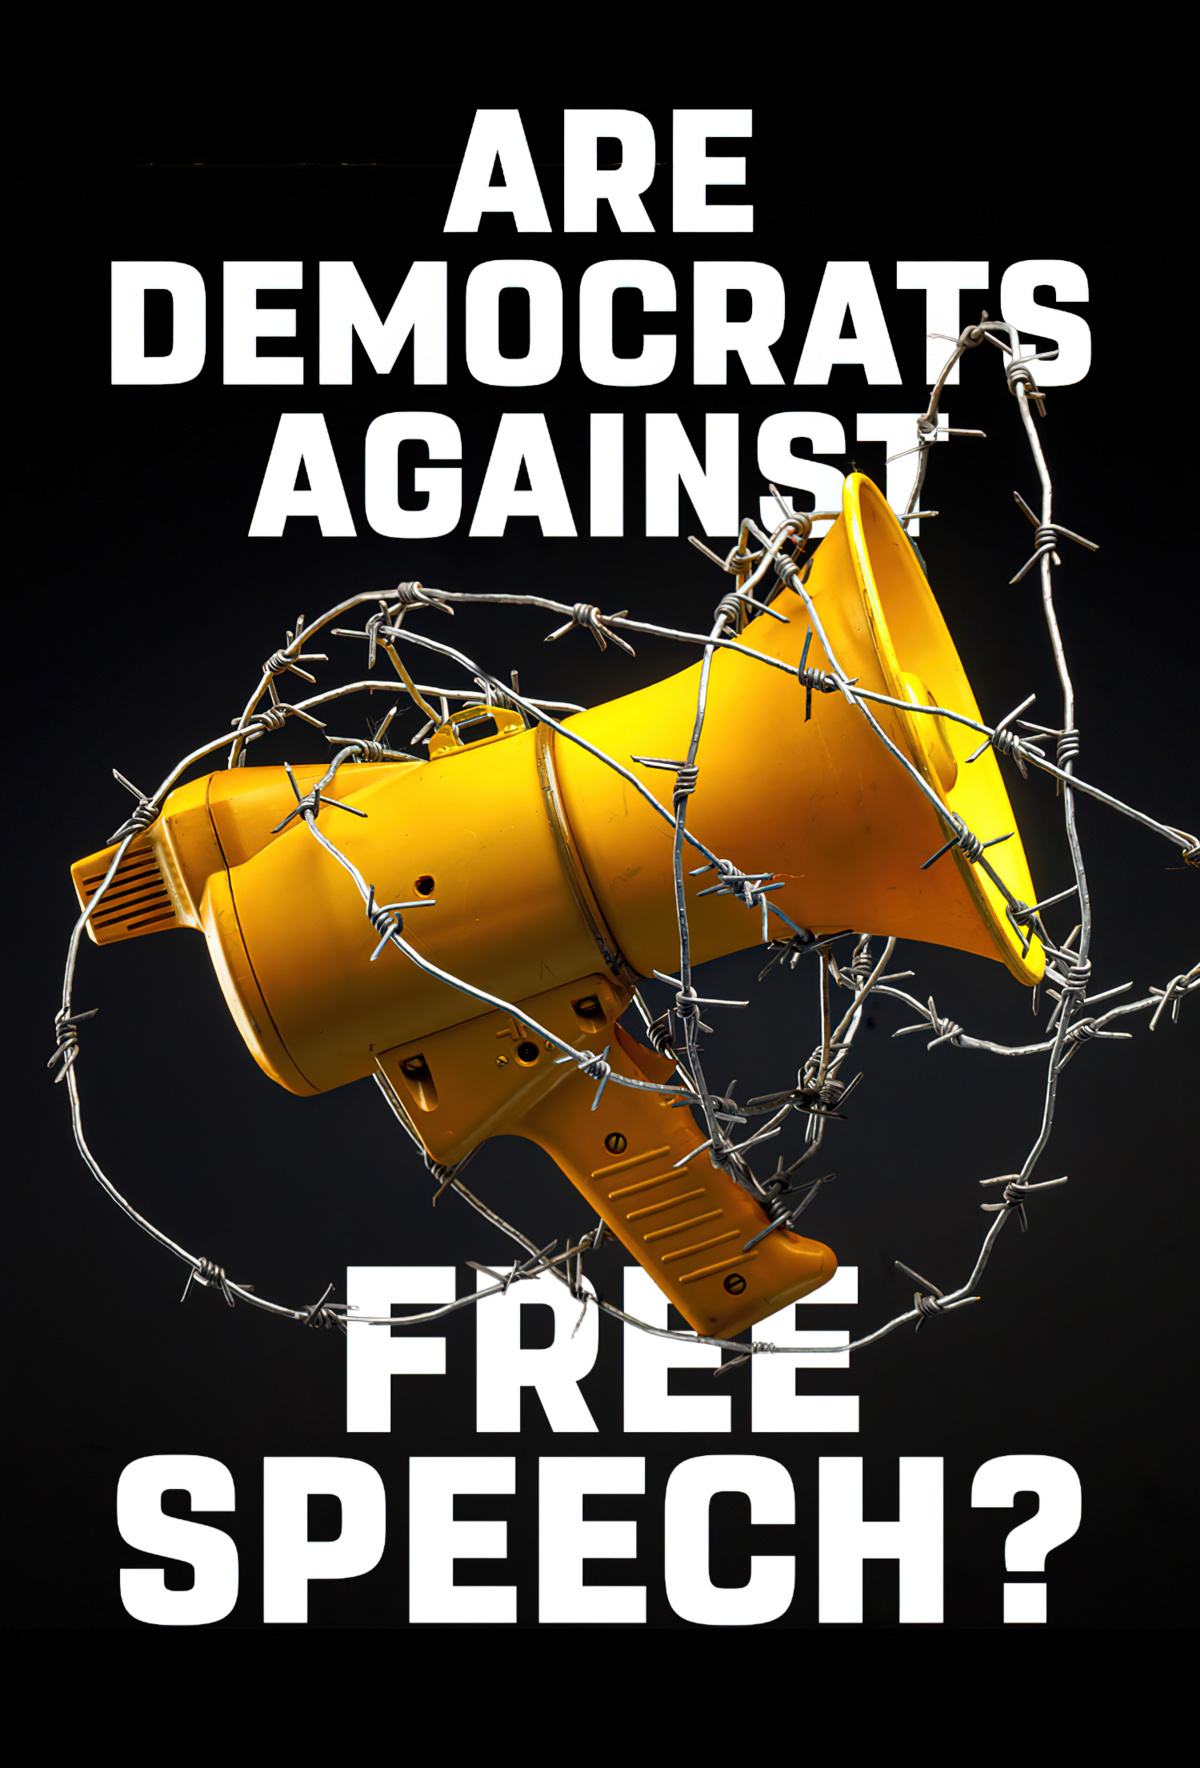 Are Democrats against Free Speech?